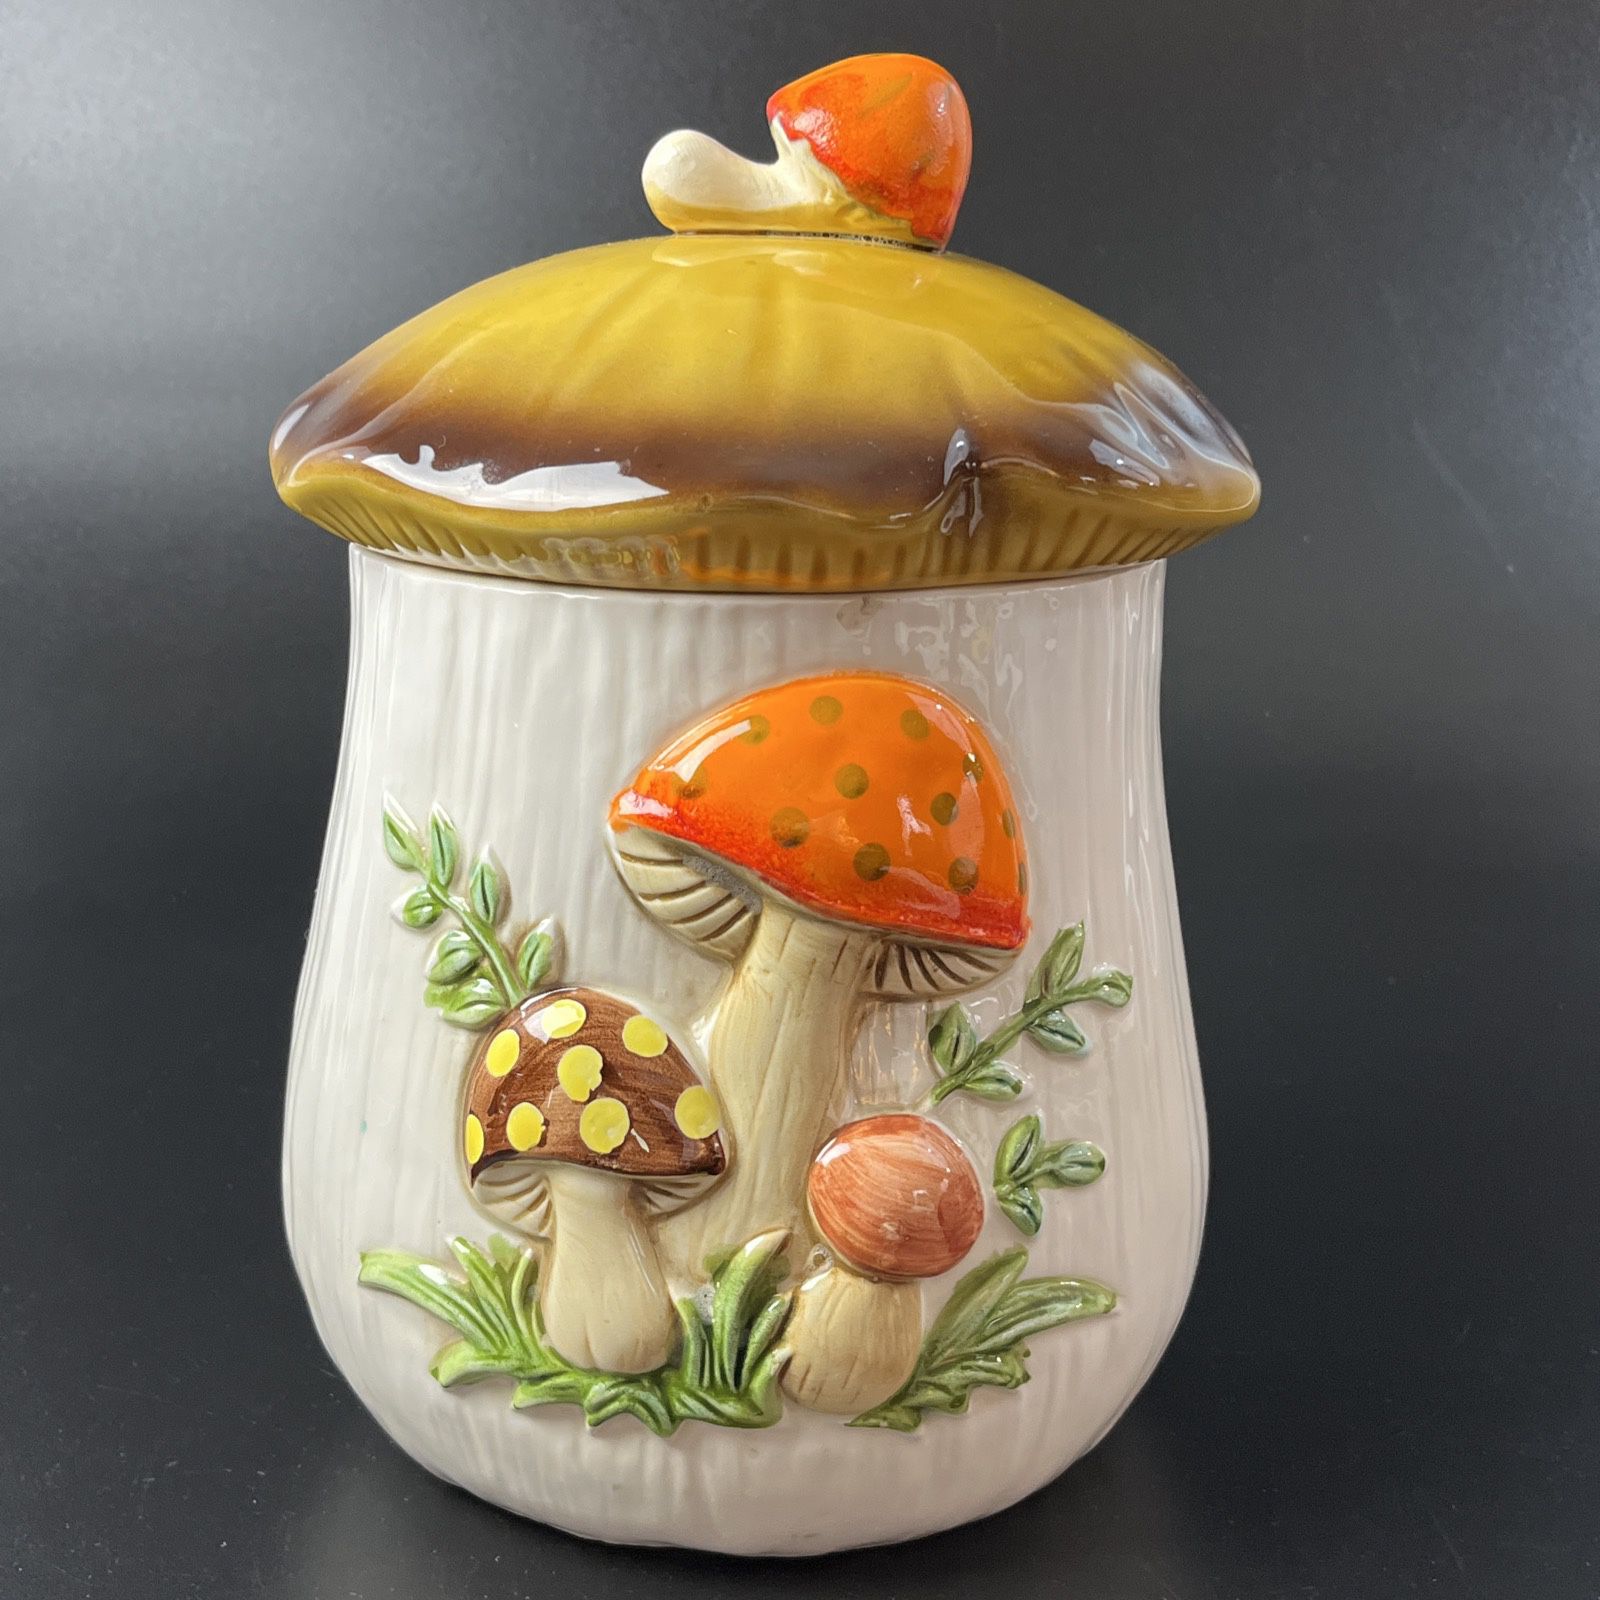 Vintage Merry Mushroom Canister Sears and Roebuck 1976 Large 11" Cookie Jar  Does have a chip on the rim which is pictured.  No others found but does 